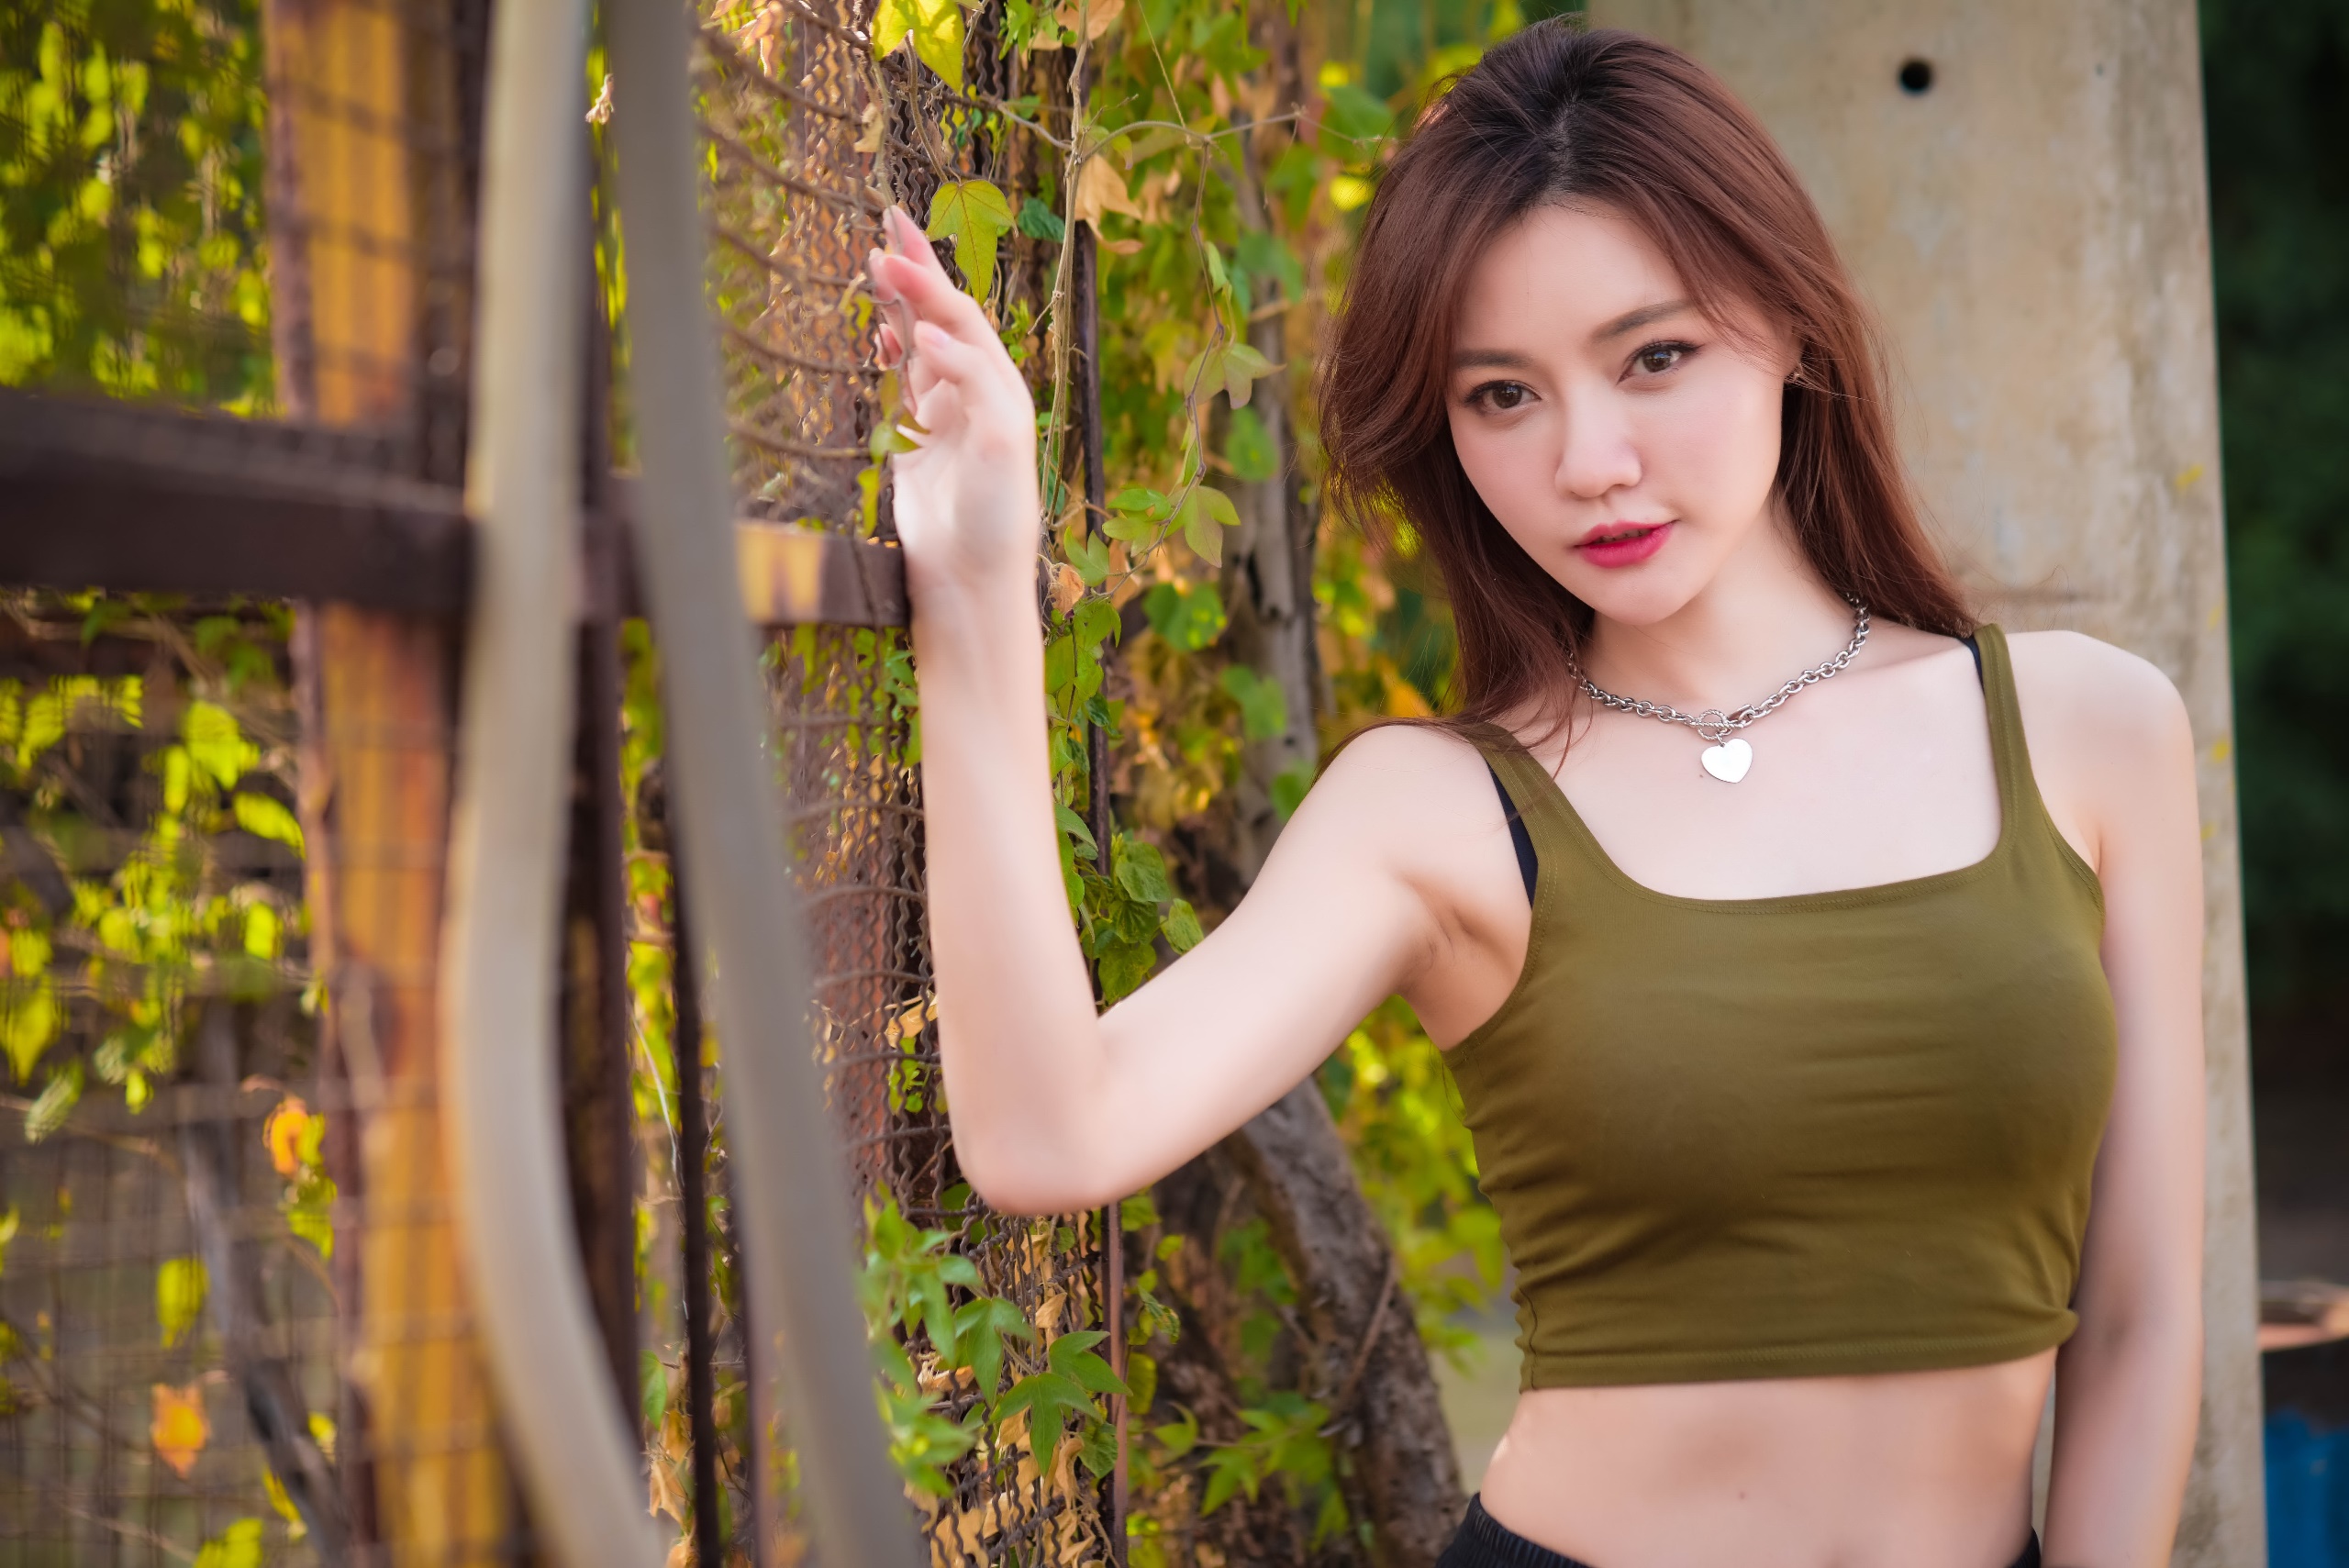 Asian Women Model Outdoors Women Outdoors Looking At Viewer Dyed Hair Necklace Heart Necklace Fence  2560x1709